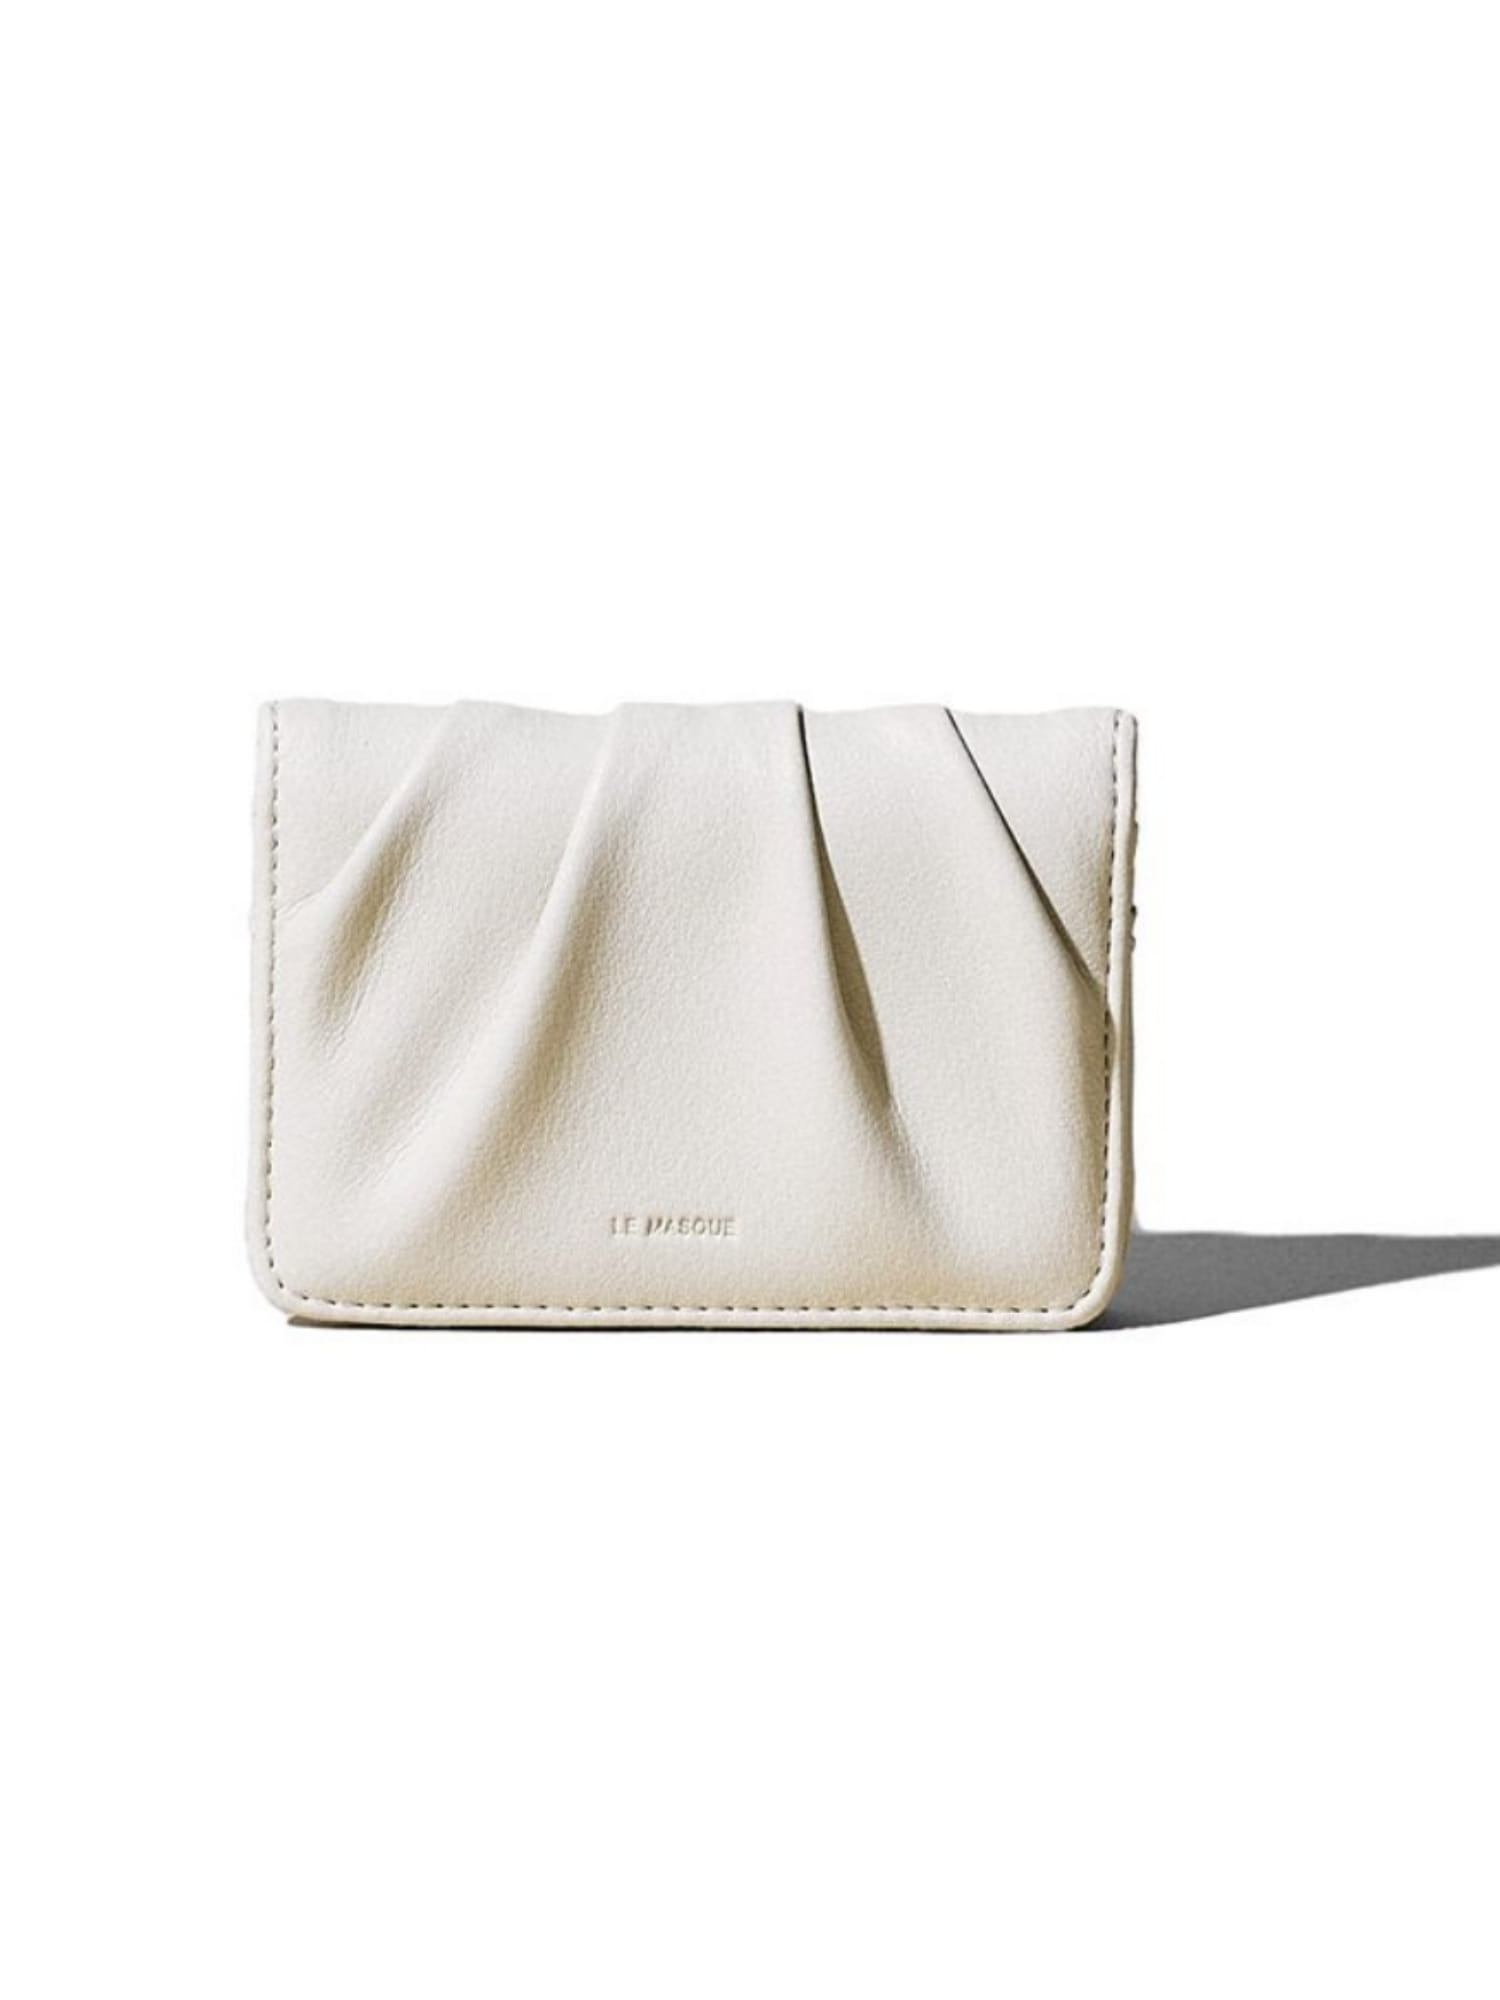 DOUGH Soft Leather Card Case Wallet - Cream White